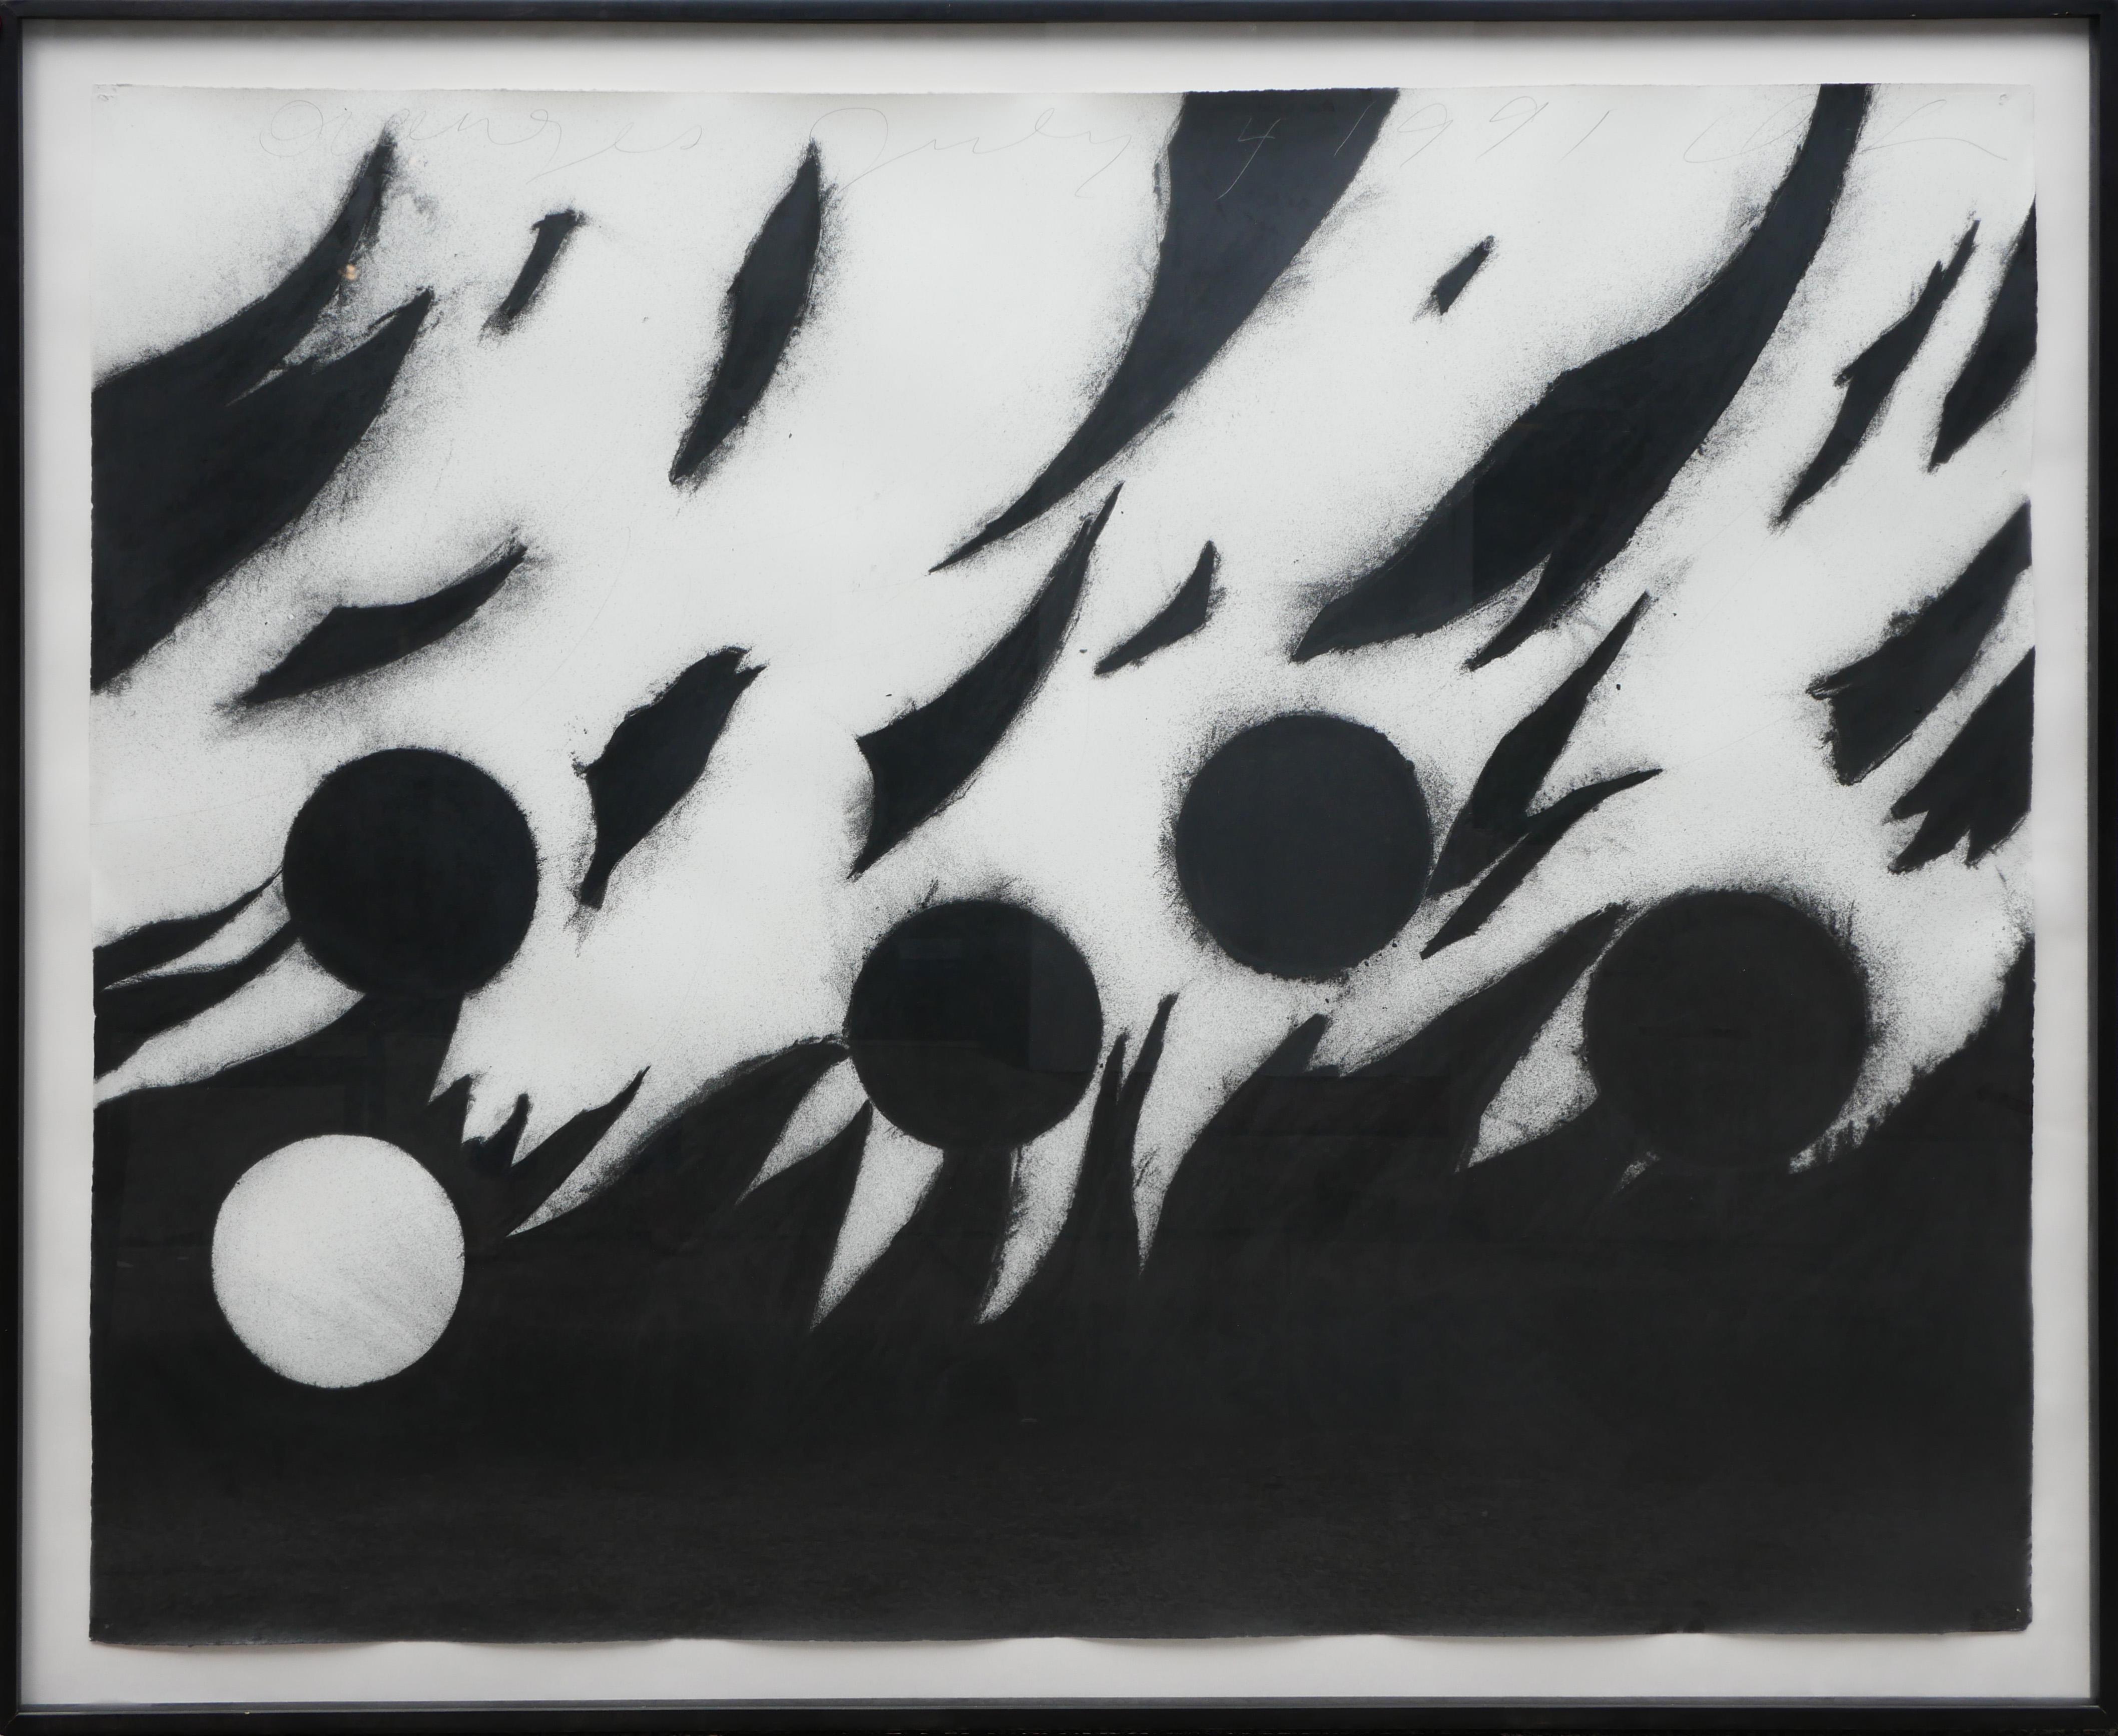 Donald Sultan Abstract Drawing - "Oranges July 4 1991" Modern Abstract Geometric Black and White Charcoal Drawing